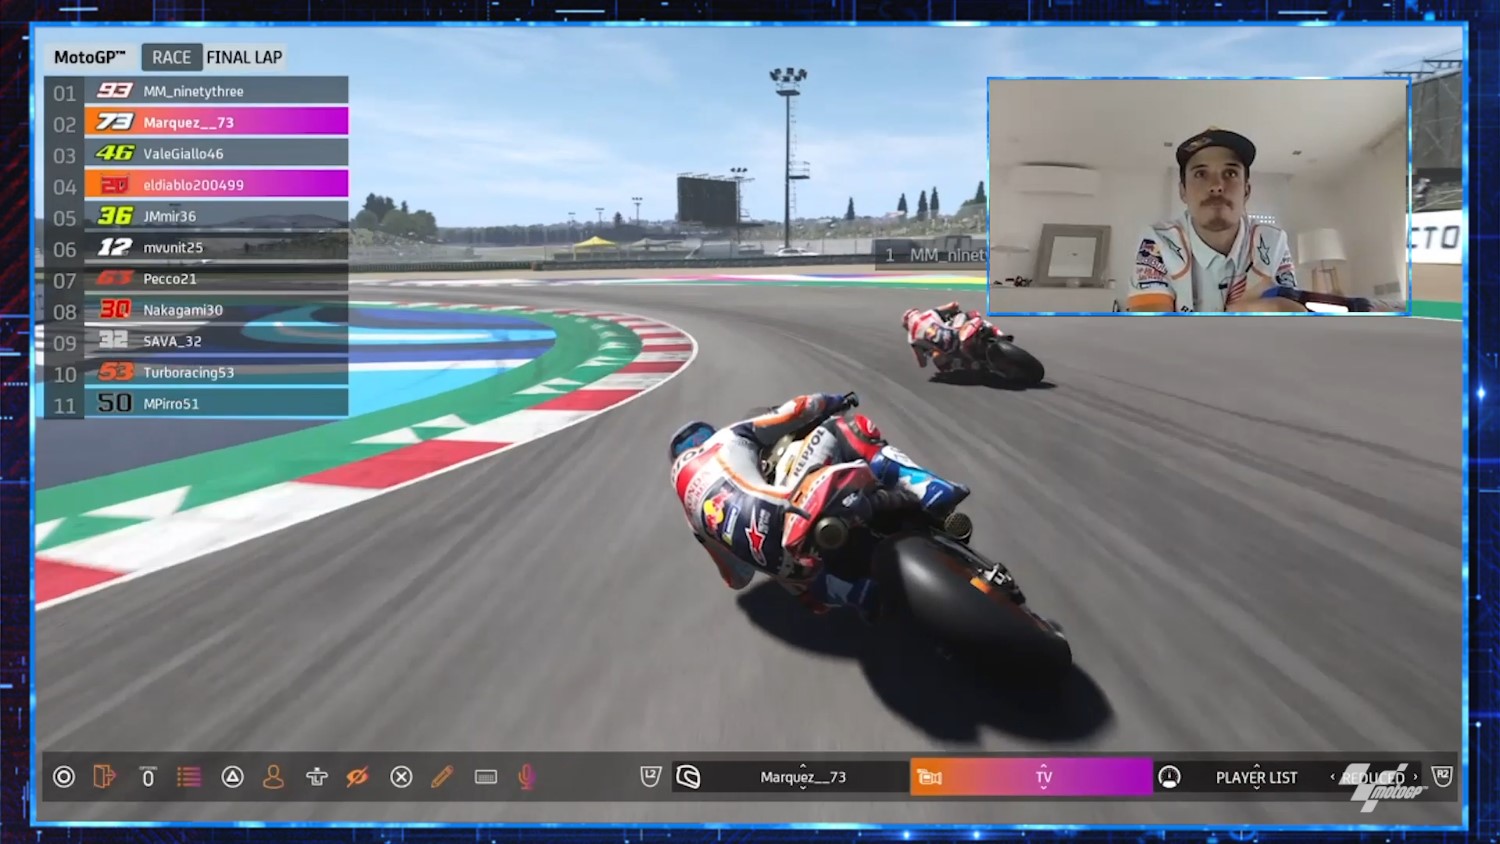 Marc chases brother Alex Marquez